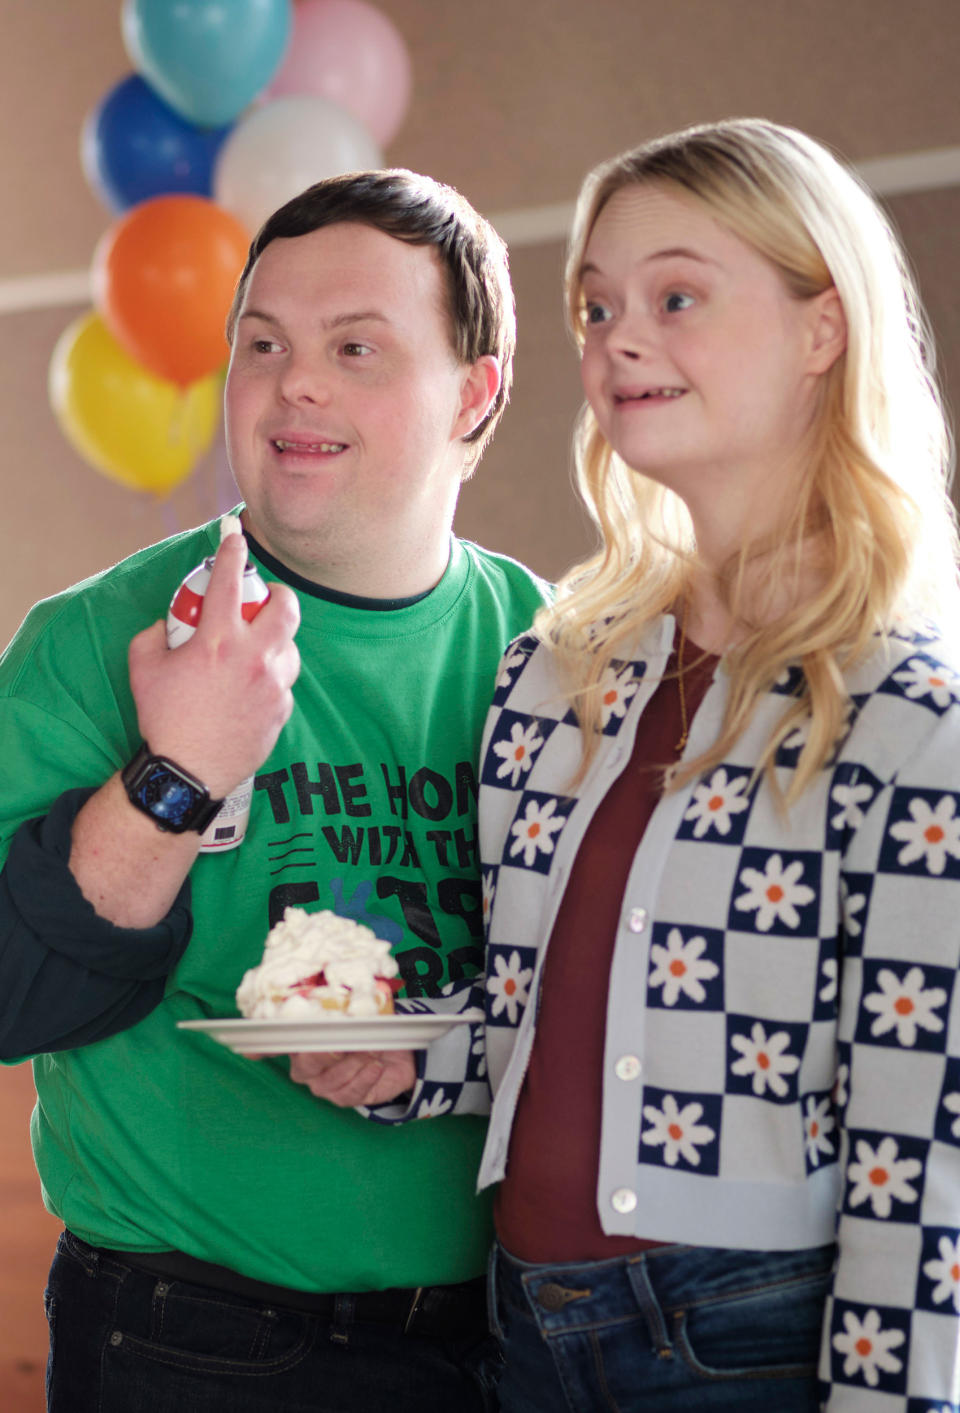 David Desanctis as Brad and Lily D. Moore as Kendall. (Luka Cyprian / Crown Media)